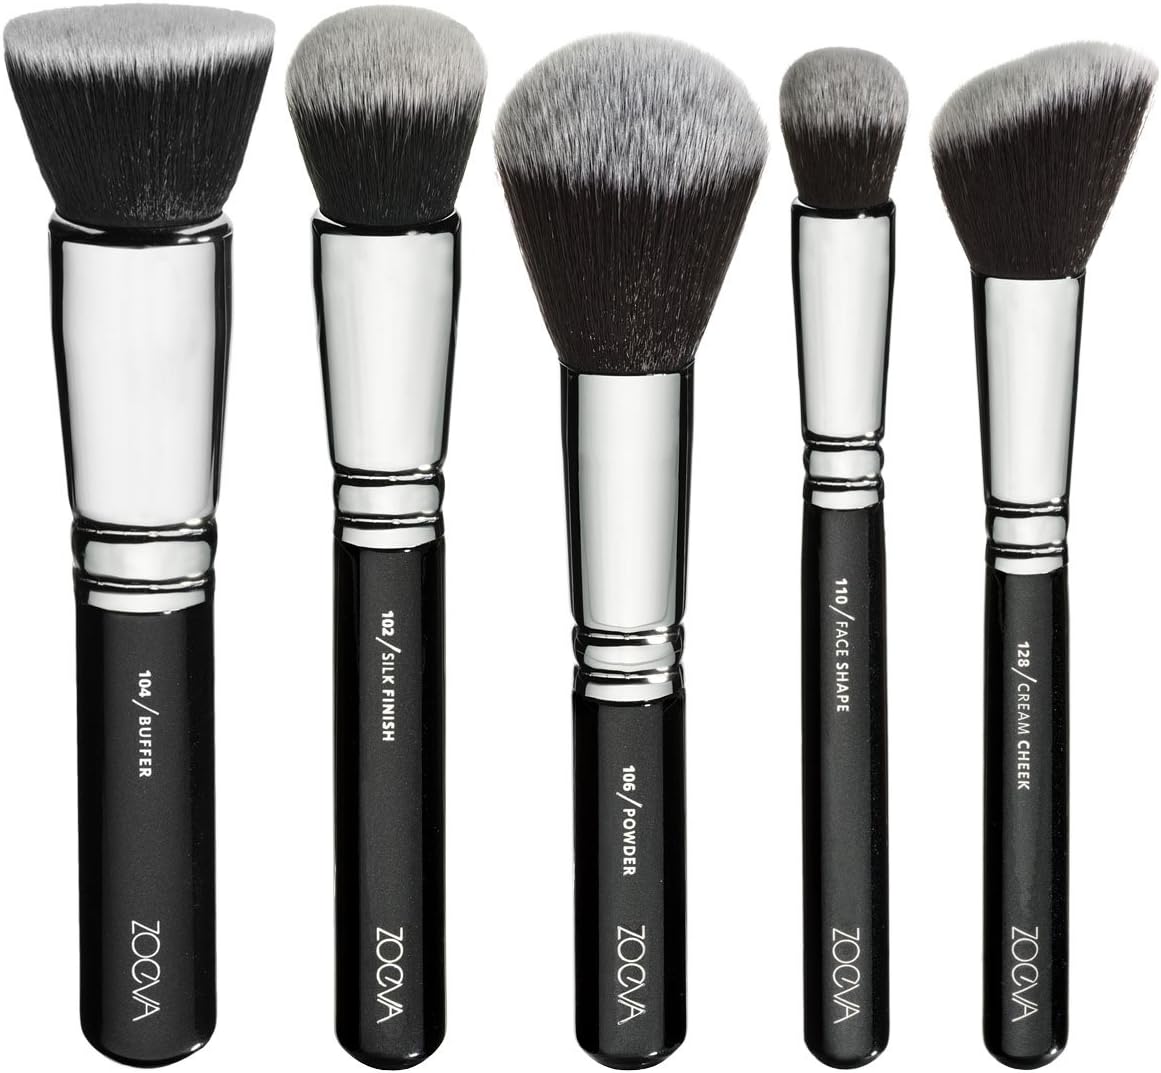 ZOEVA COMPLETE SET “Own it.” Exclusive selection of 15 bestseller brushes for face and eyes. 100% Authentic